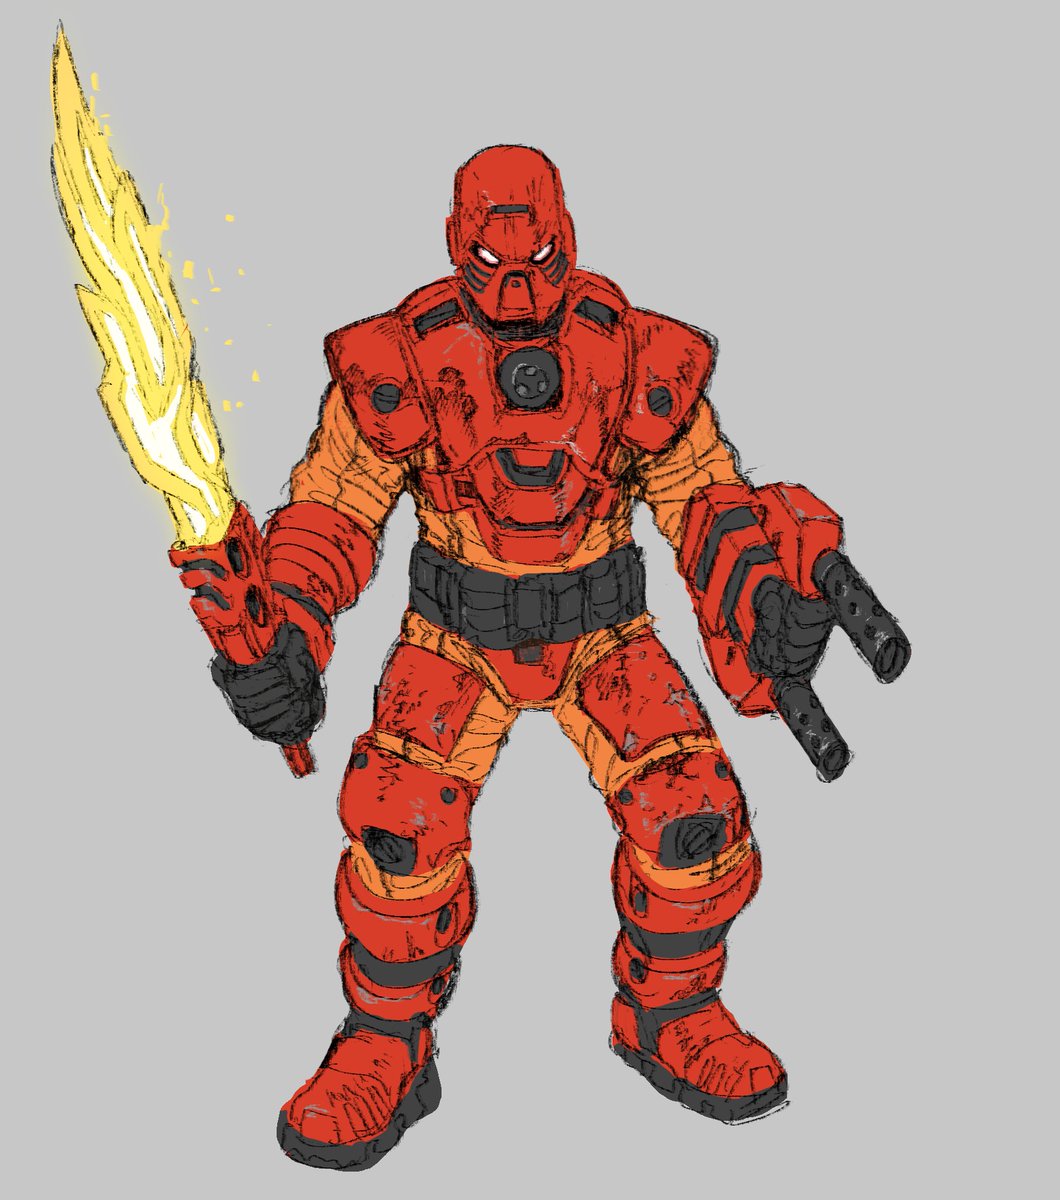 「Rough Tahu suit idea 🔥 」|Jeetdohのイラスト